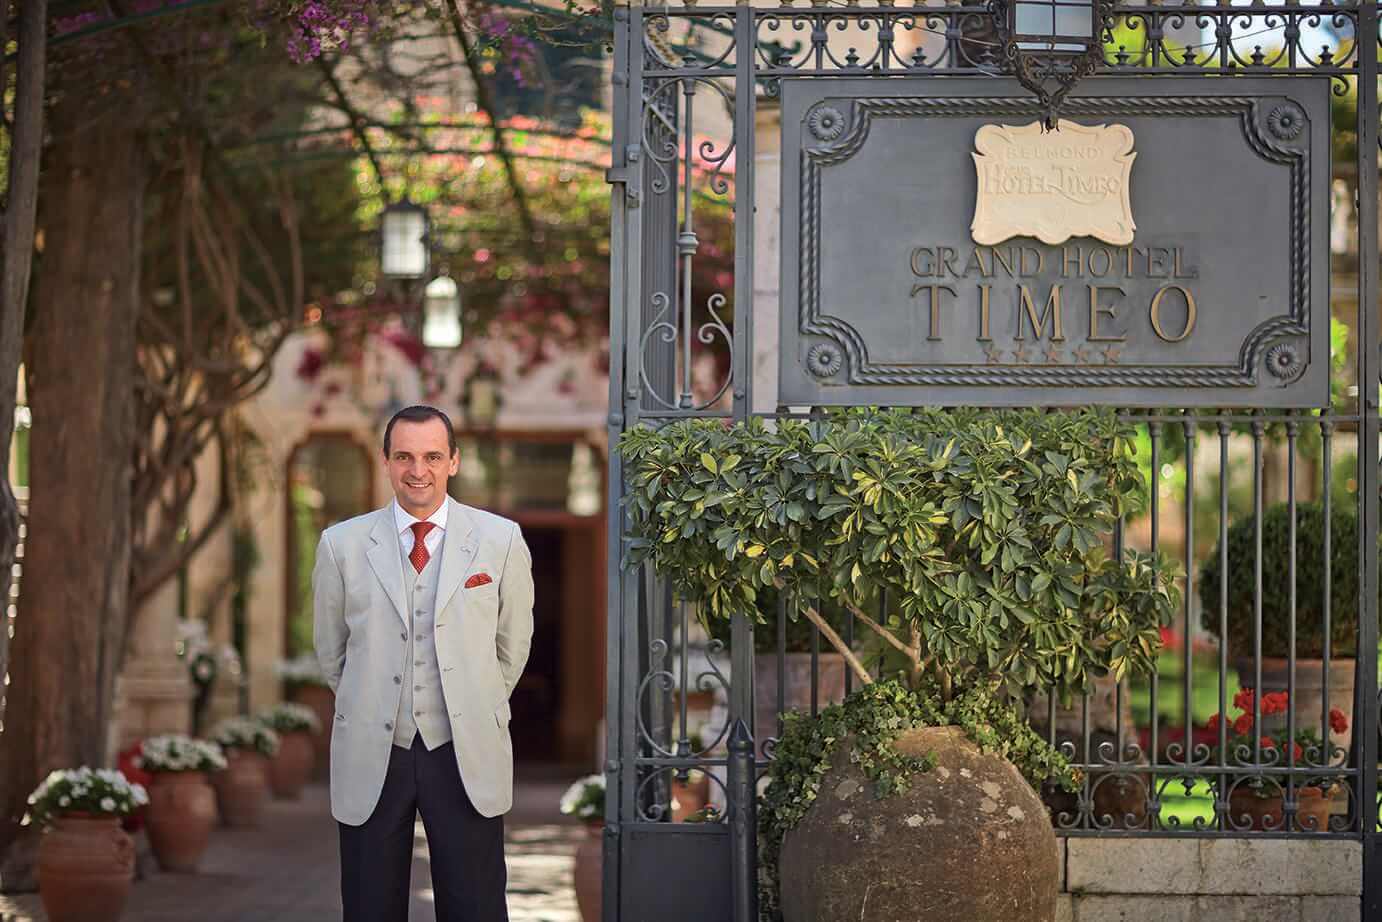 Here's our Thursday - Grand Hotel Timeo, A Belmond Hotel